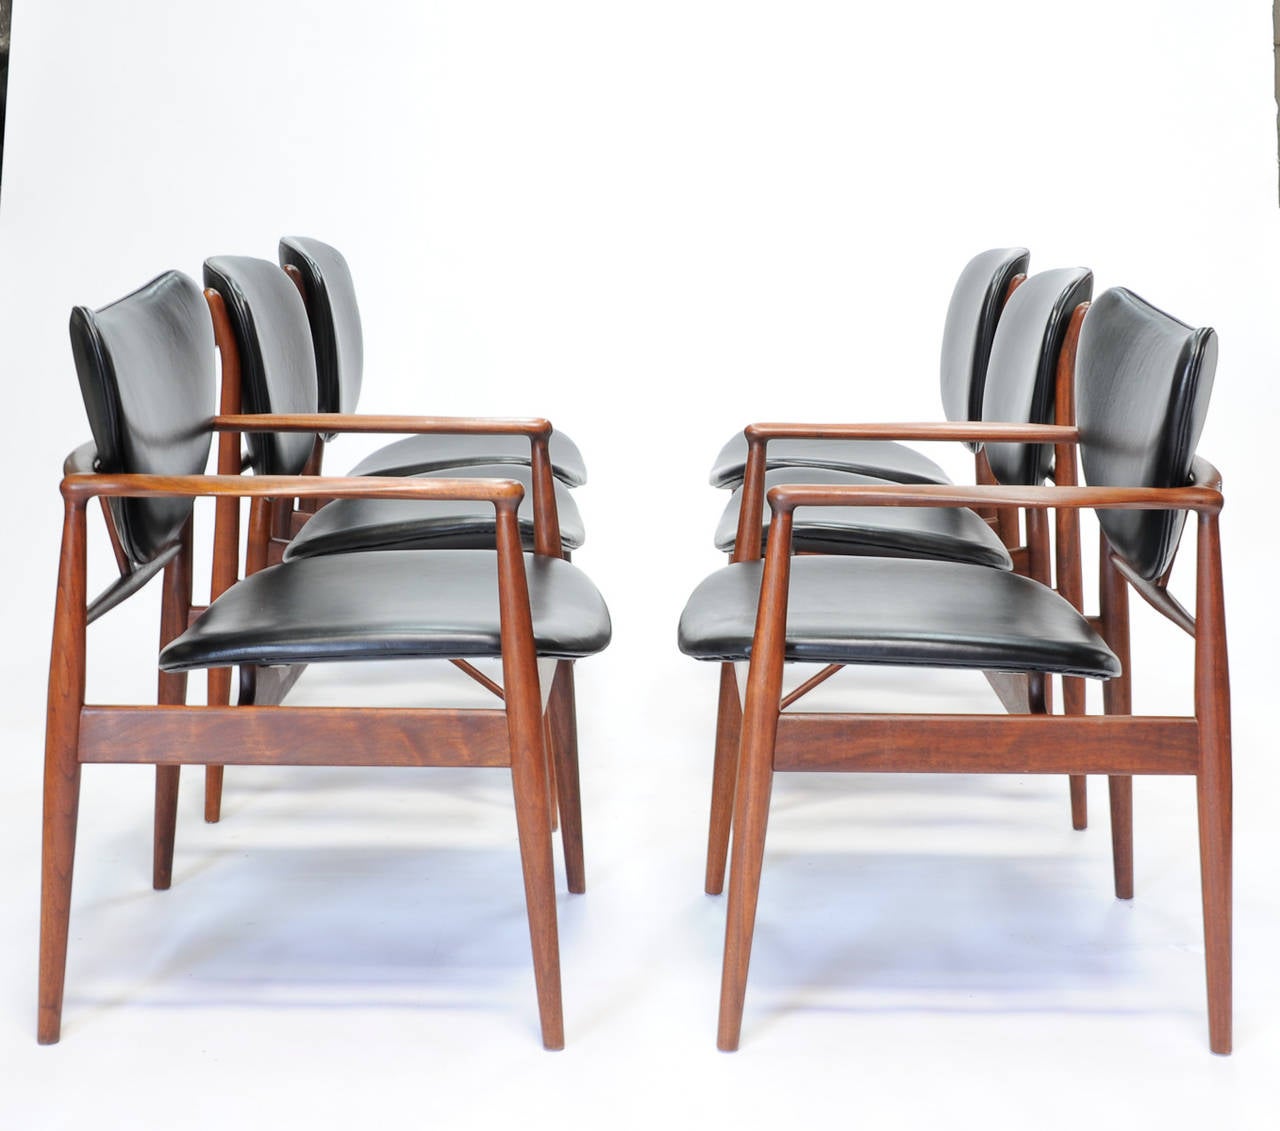 A refined and elegant set of six dining chair by Finn Juhl for Baker Furniture. Measures: Arm height is 255, H side chairs are 32